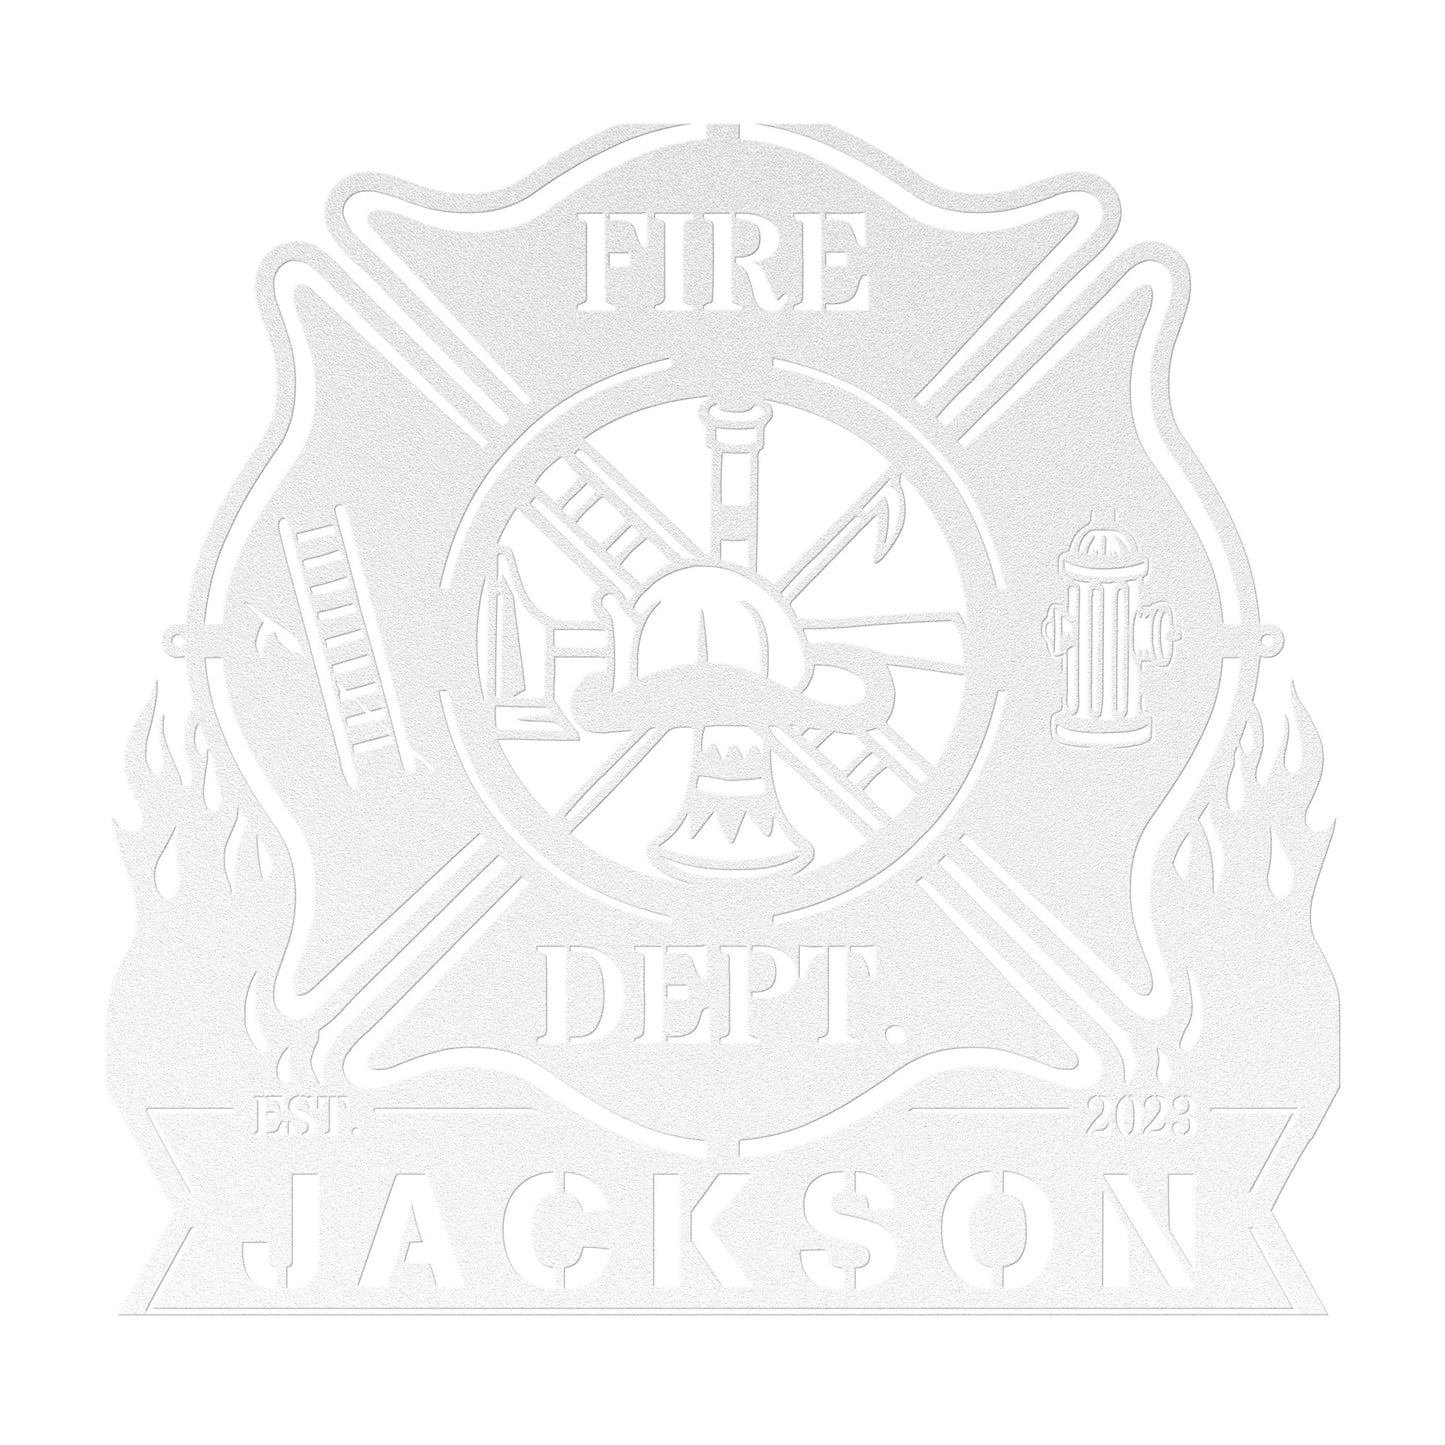 Wall Art Personalized Firefighter Gift, Metal Sign, Personalize Gift, Fireman Gift, First Responder Gift, Firefighter Decor, FireFighter Sign teelaunch